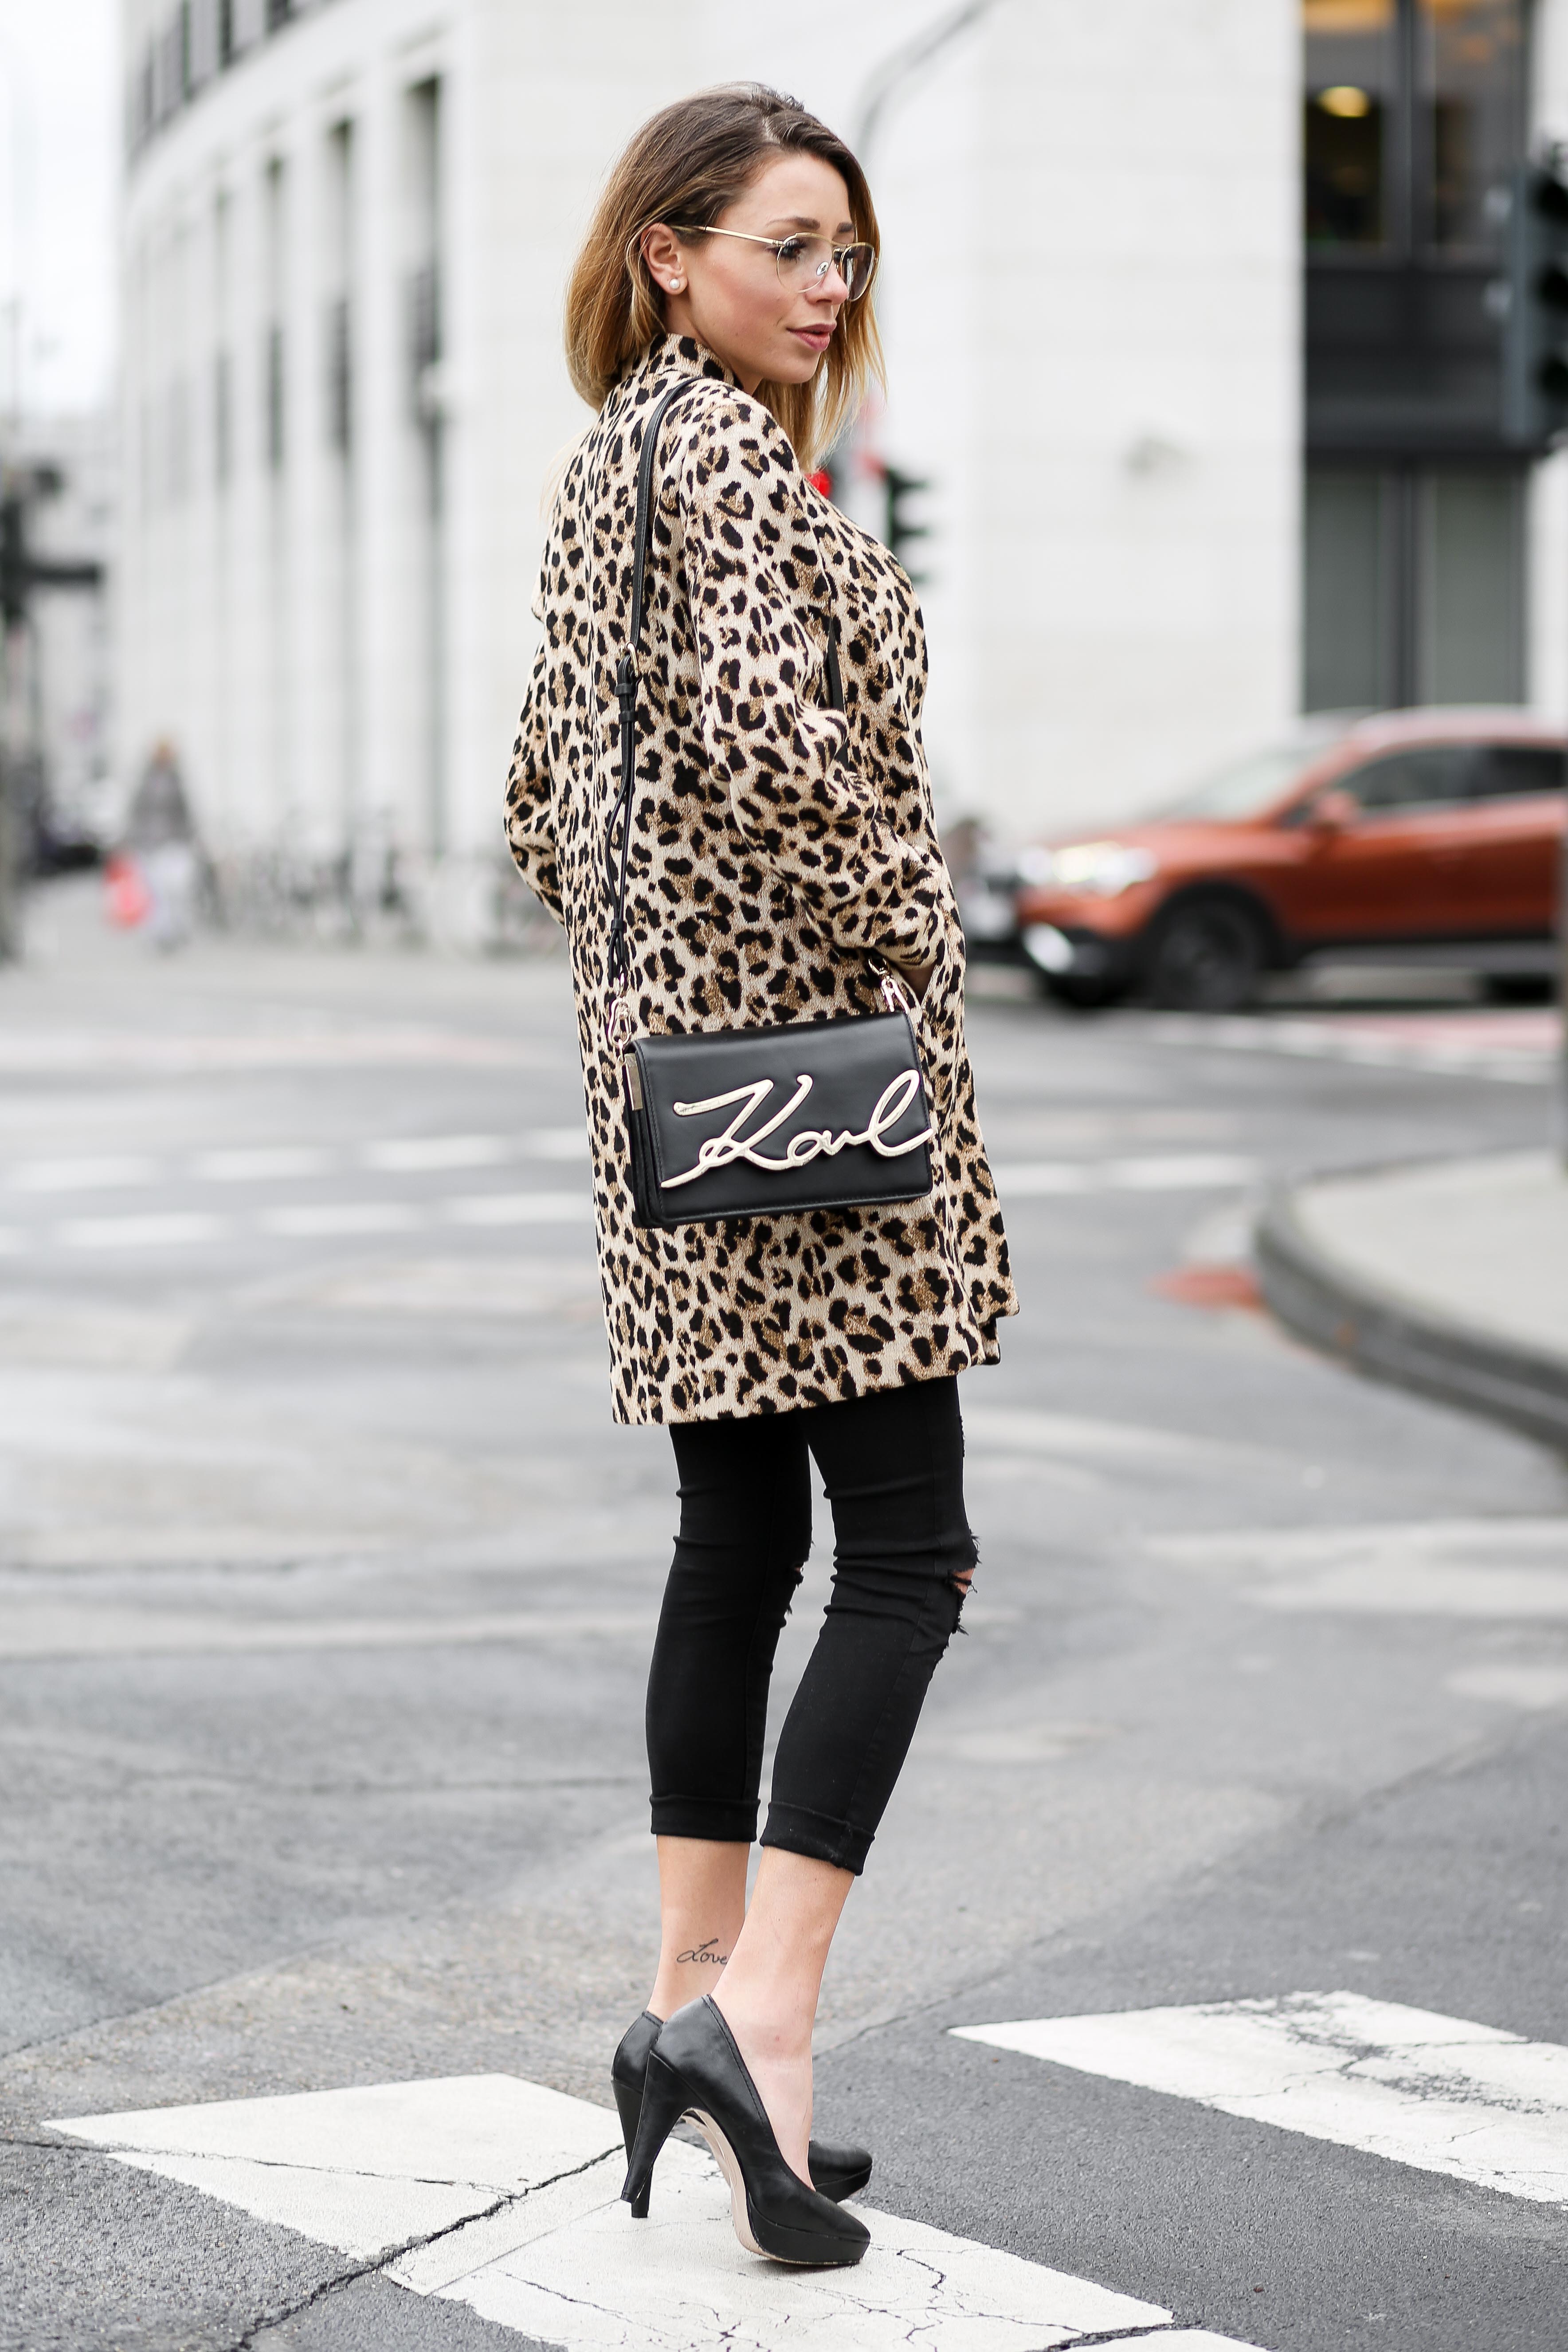 fashionblog-koeln-outfit-ootd-streetstyle-karl-lagerfeld-signature-bag-10